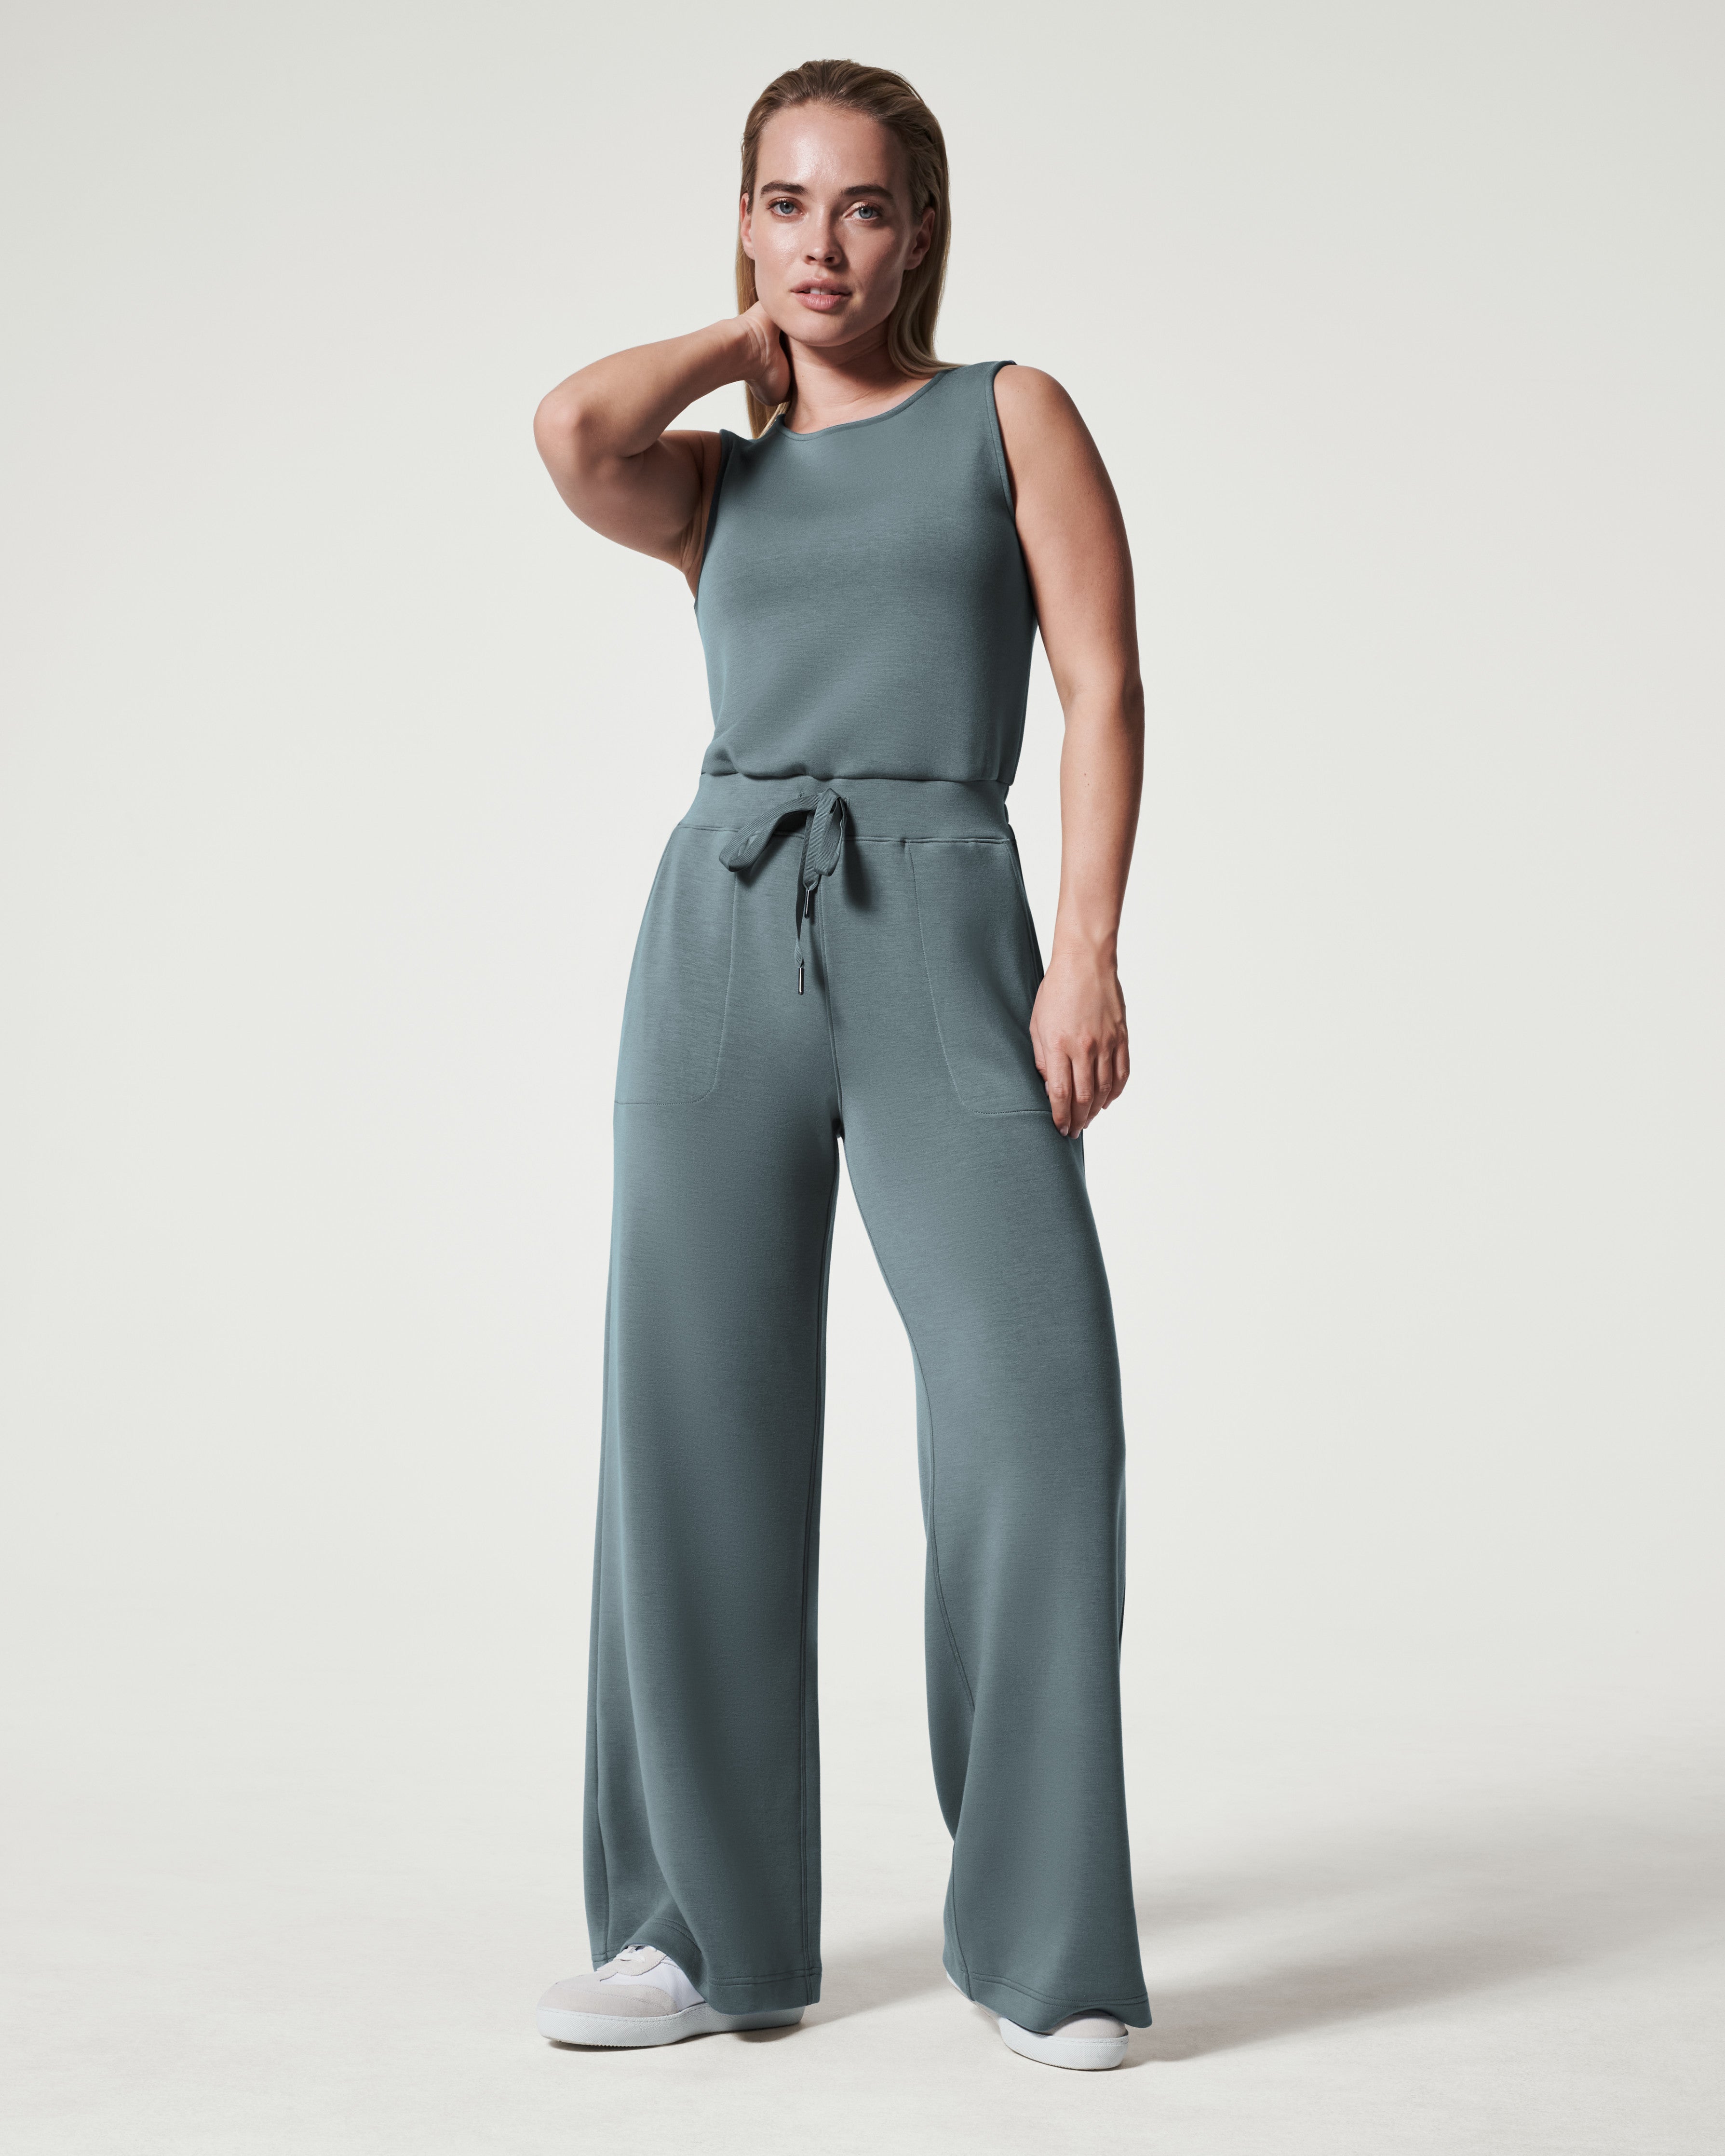 Love the comfy and trendy air Anrabess Air Essentials jumpsuits